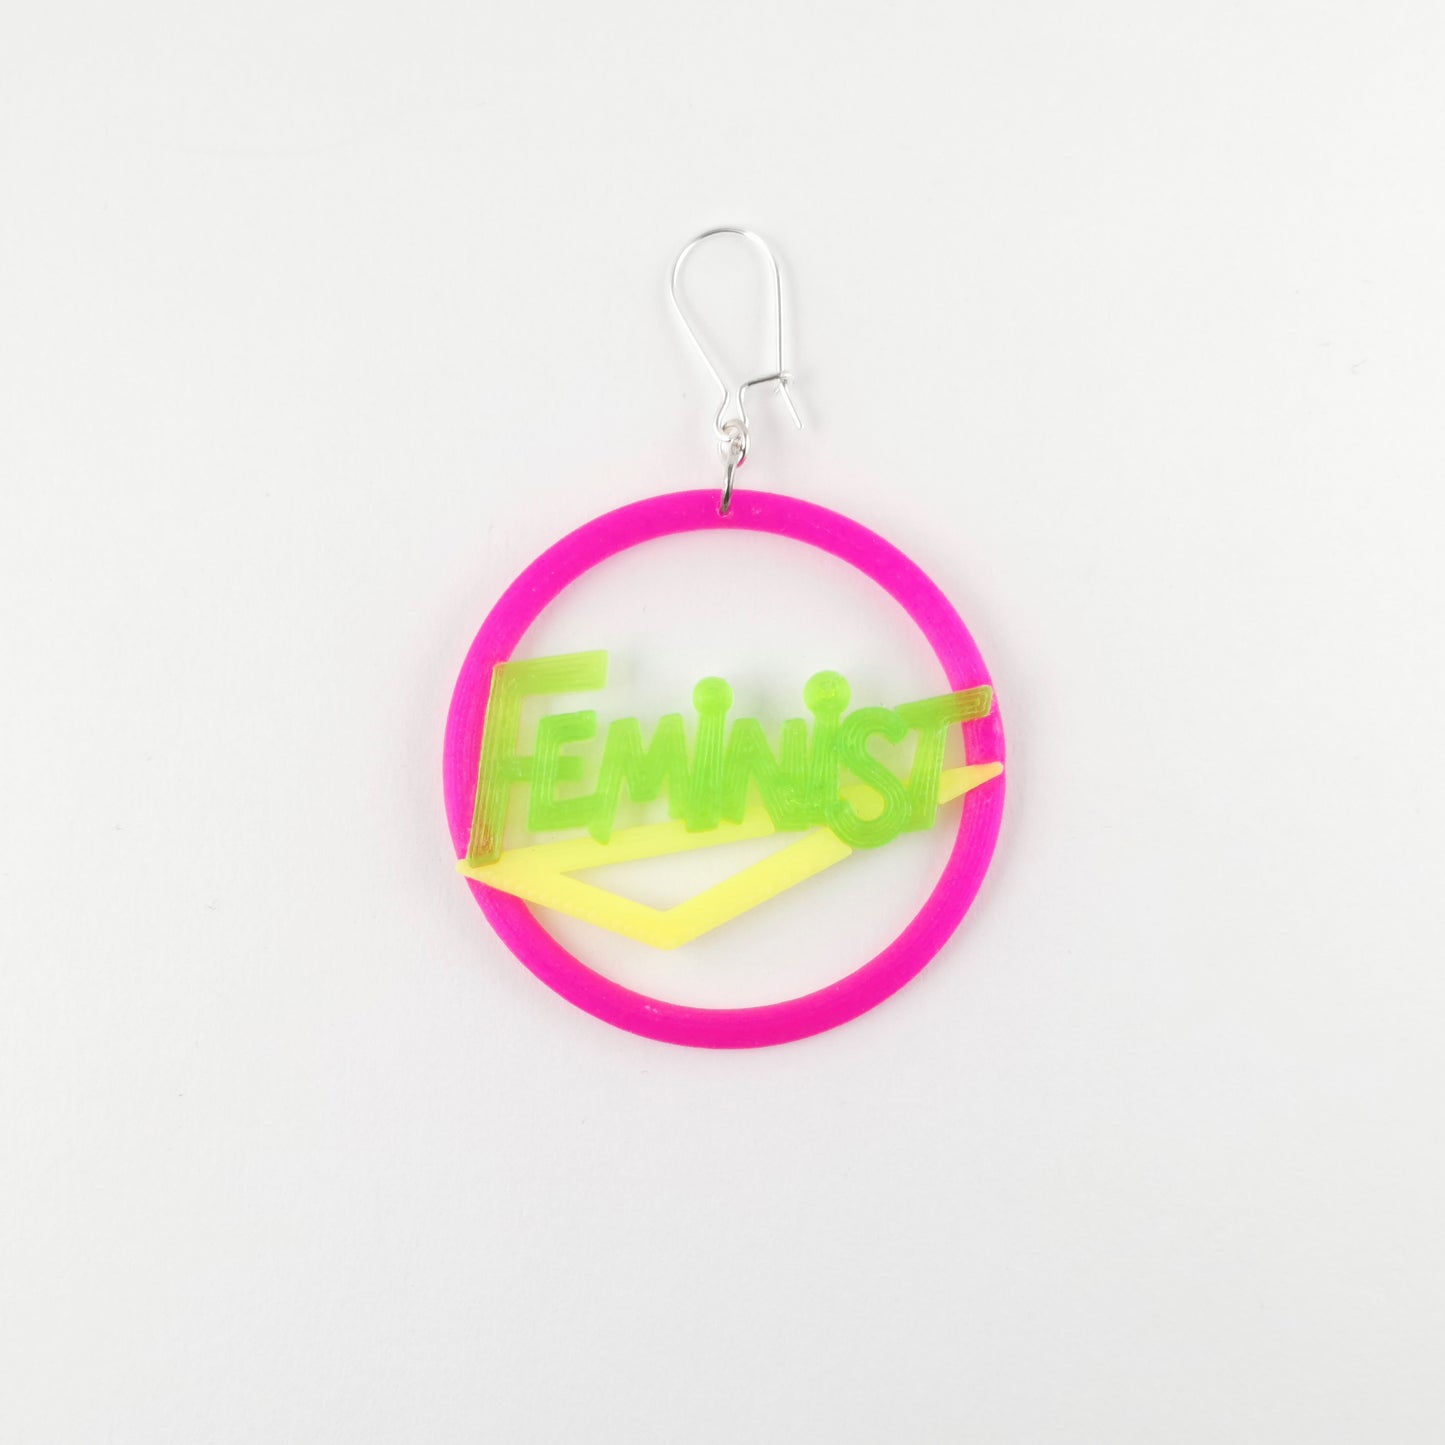 80's feminist earring in bright neon pink, green and yellow